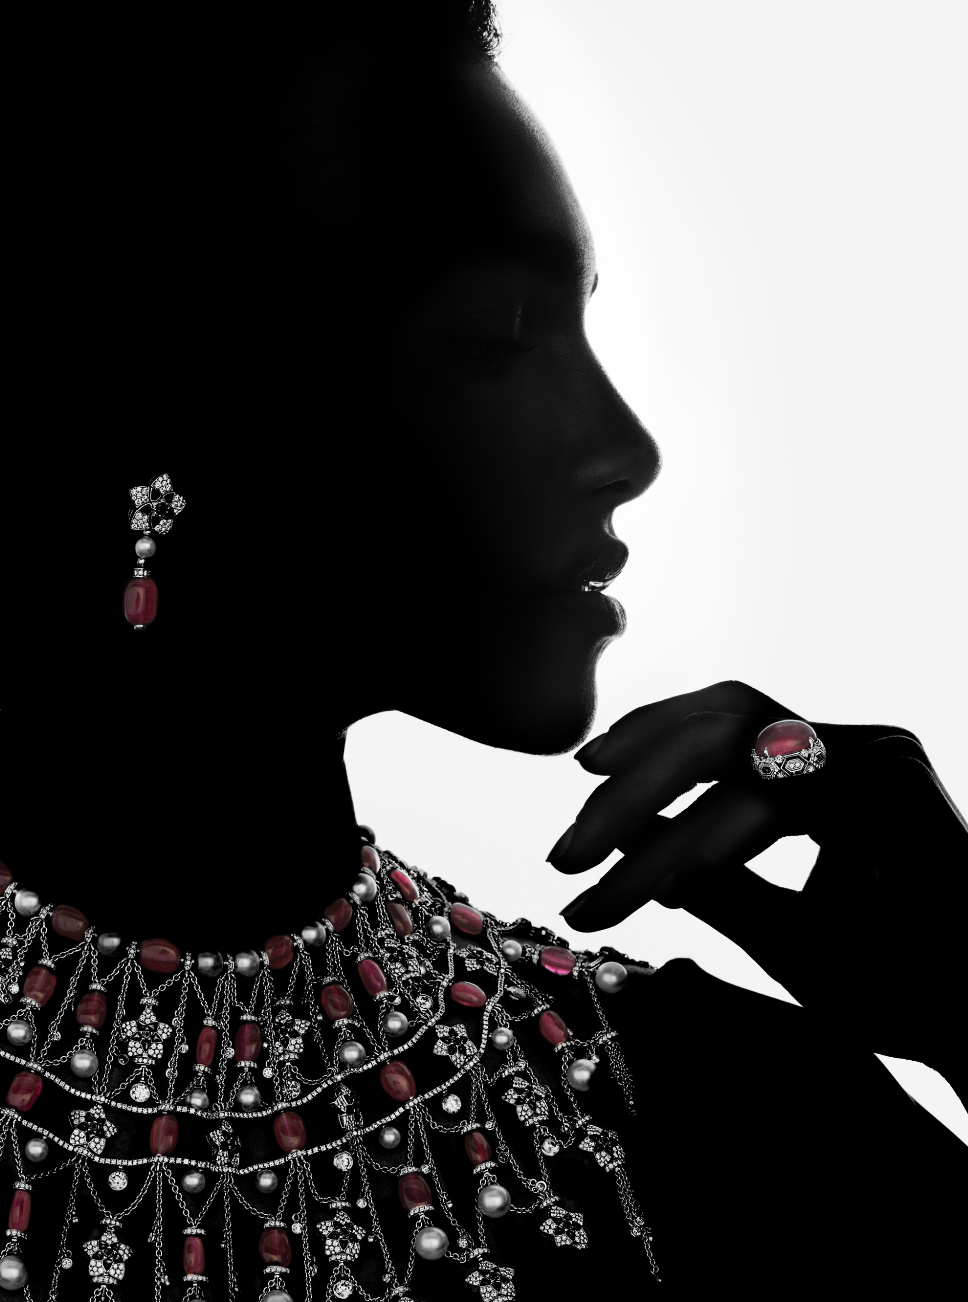 Bulgari Magnifica: A high jewellery collection that combines